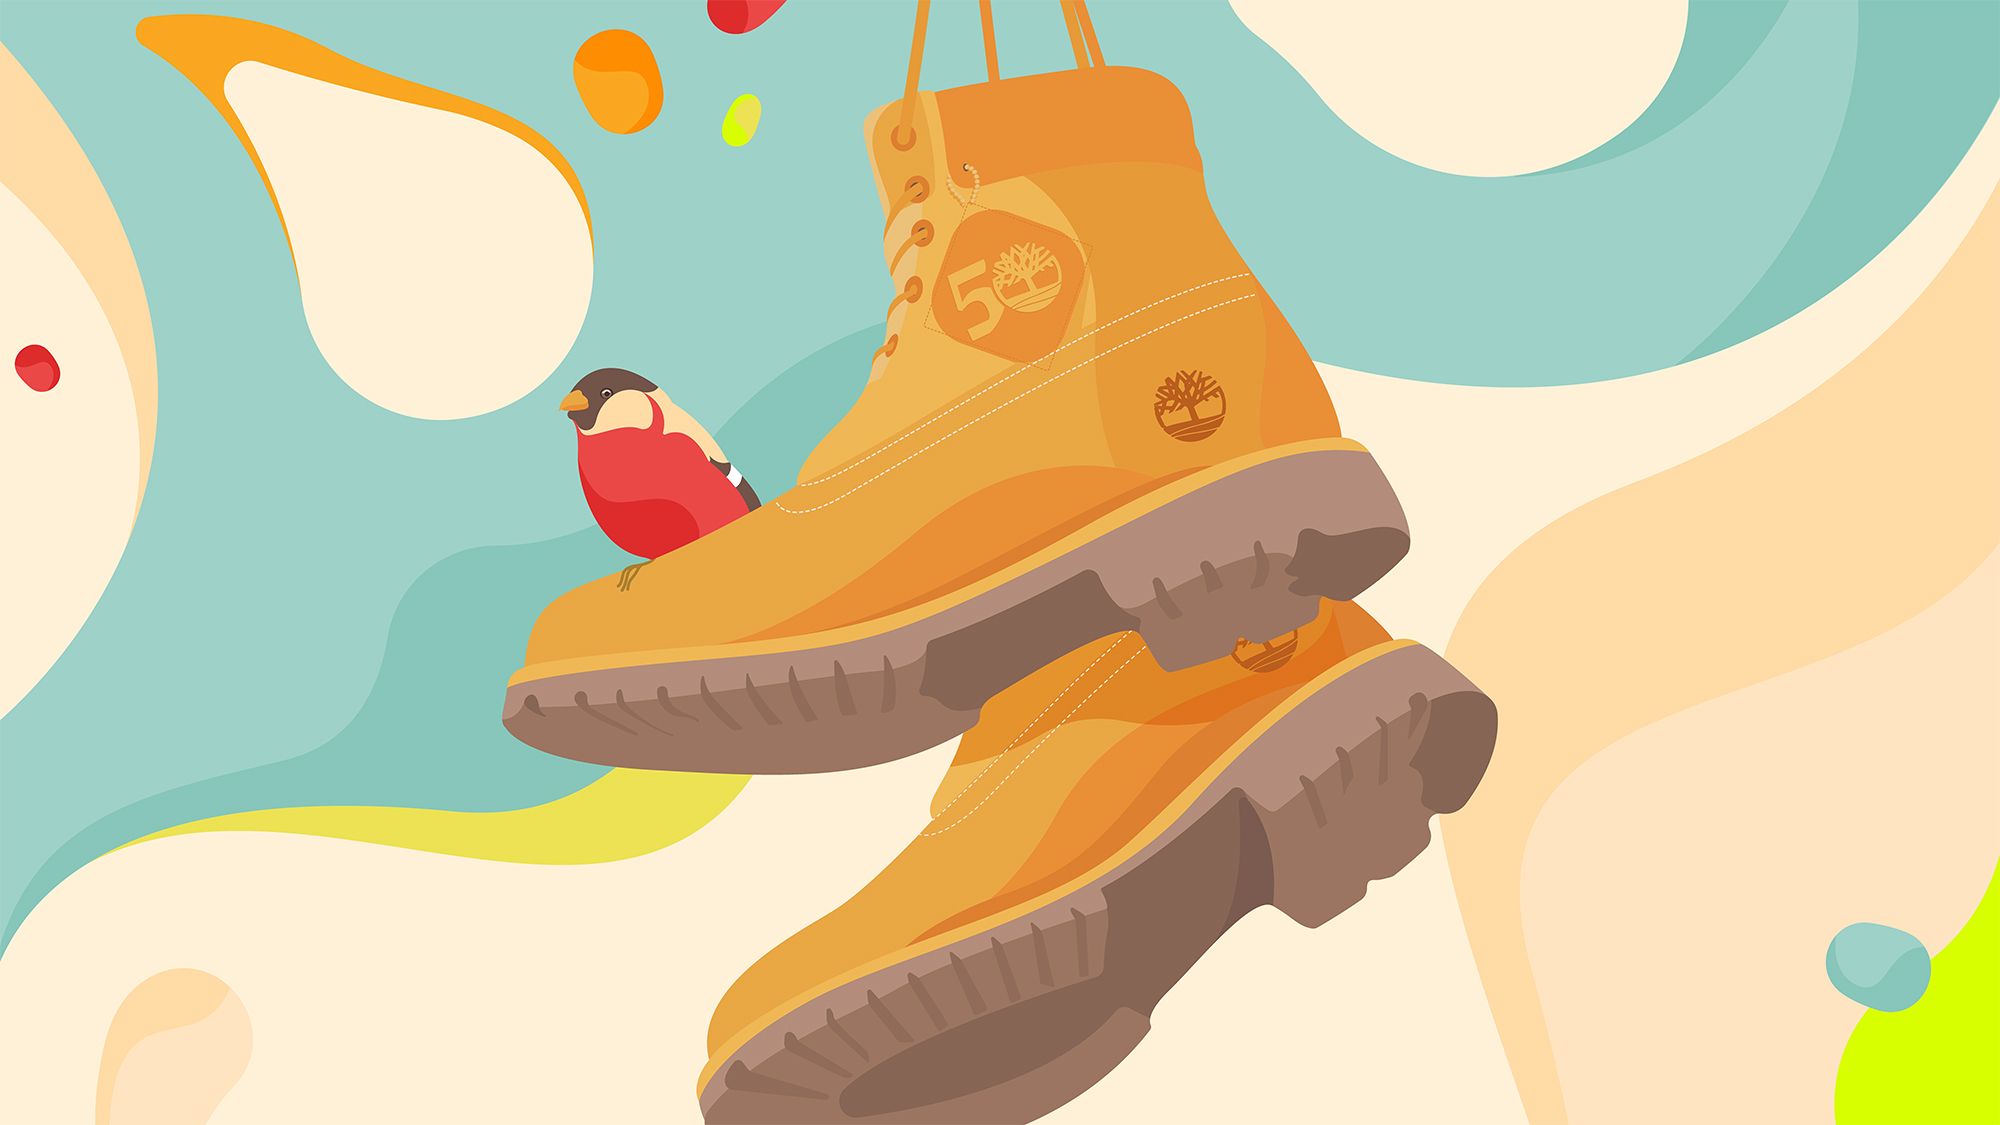 Illustration of dark cheddar colorway of Timberland boots with 50th anniversary logo on them